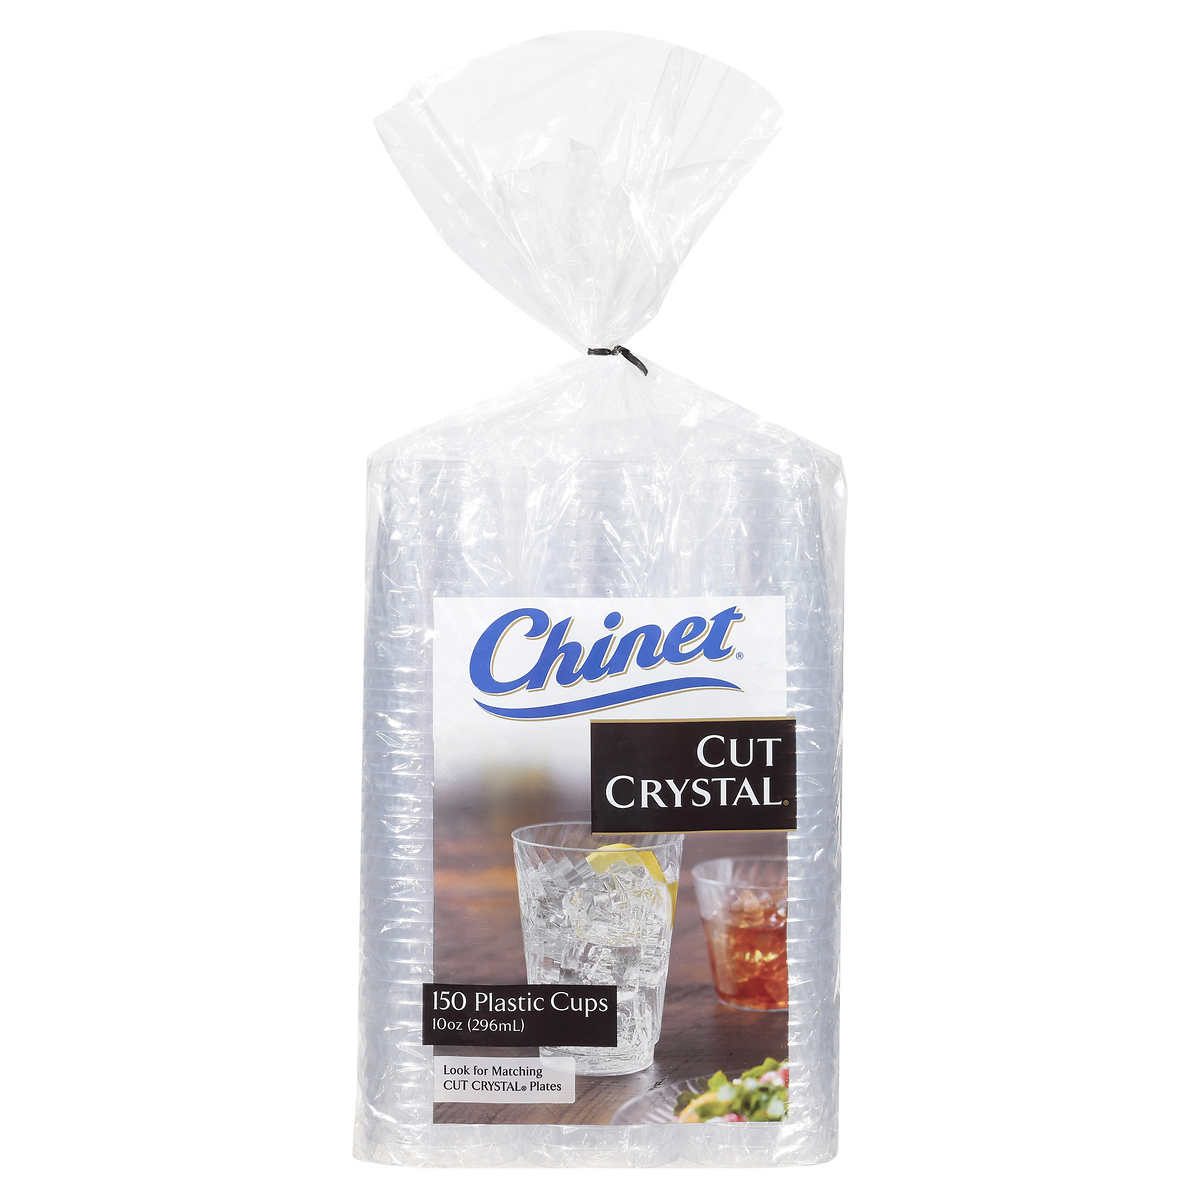 Chinet Cut Crystal Plastic Cup, Clear, 10 Oz, 150-count